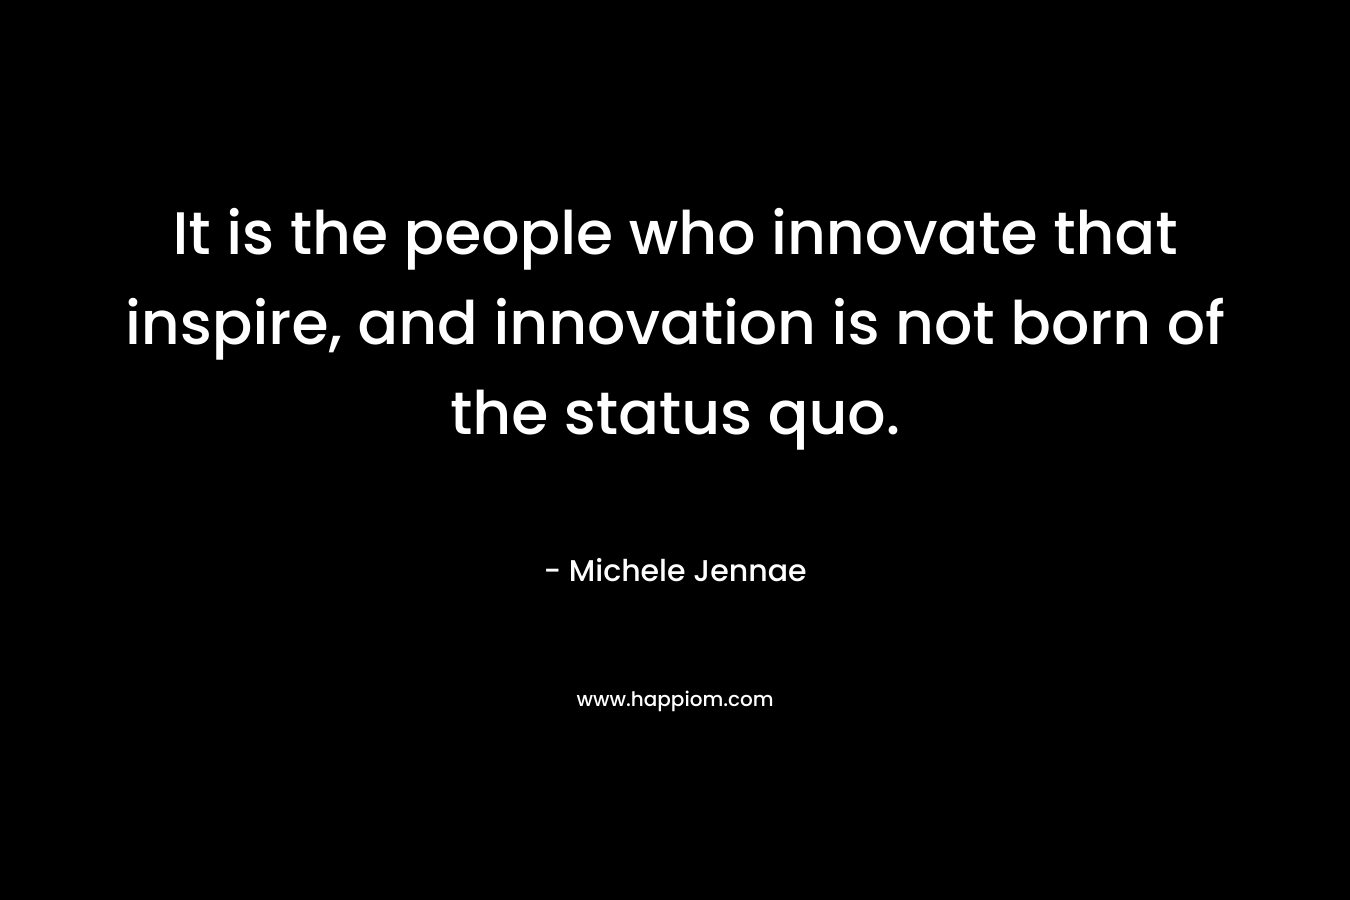 It is the people who innovate that inspire, and innovation is not born of the status quo.